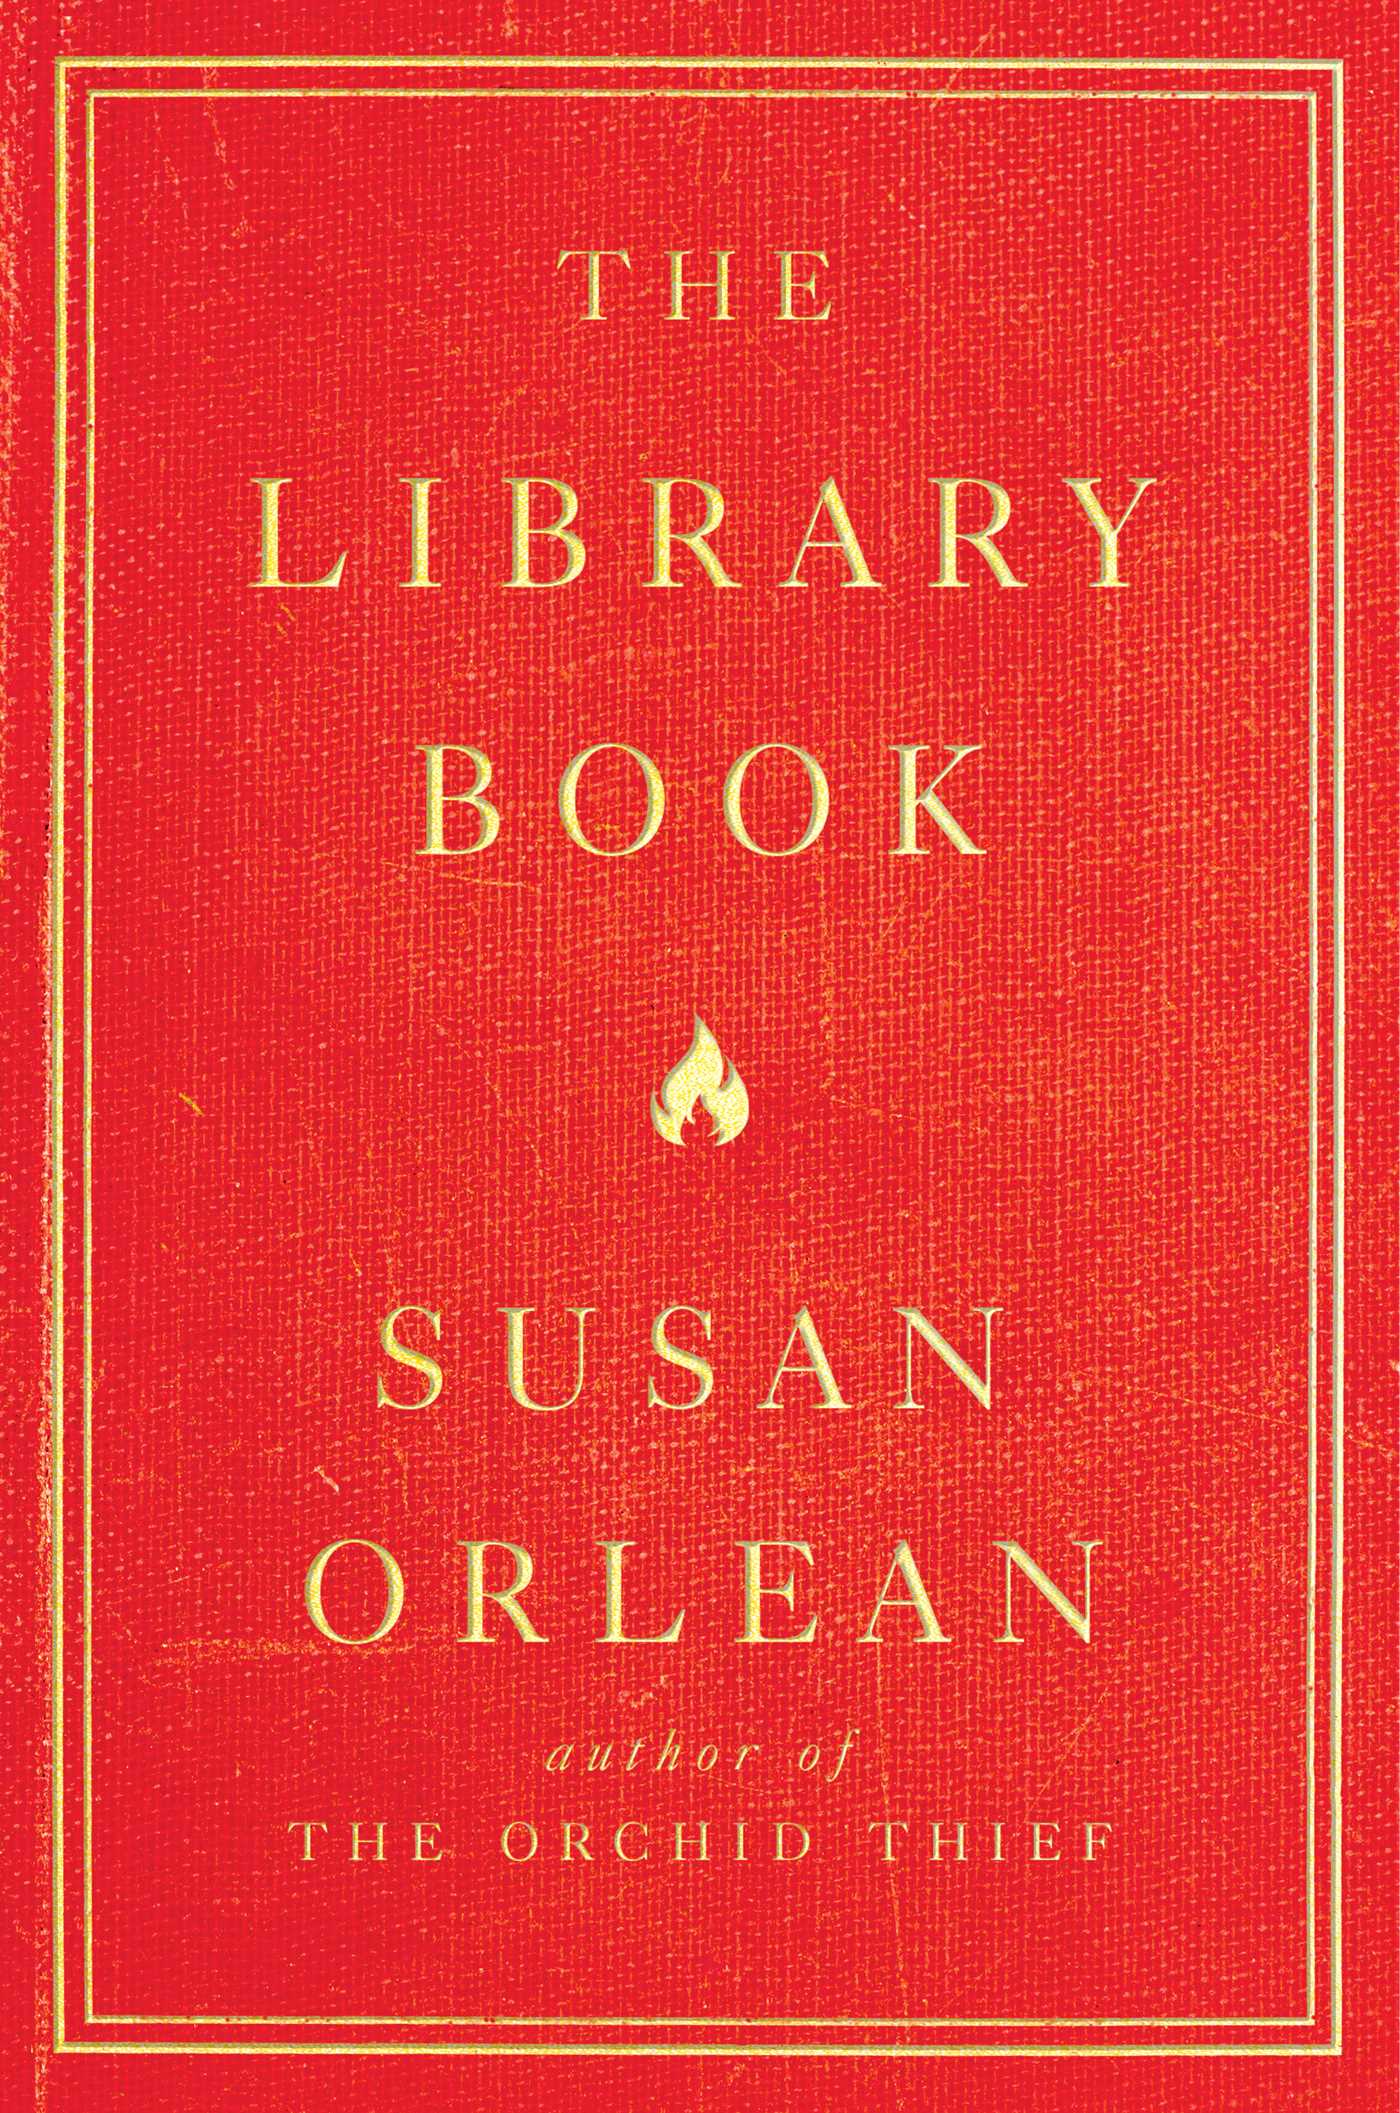 Book cover of Susan Orlean's The Library Book (red with gold lettering)